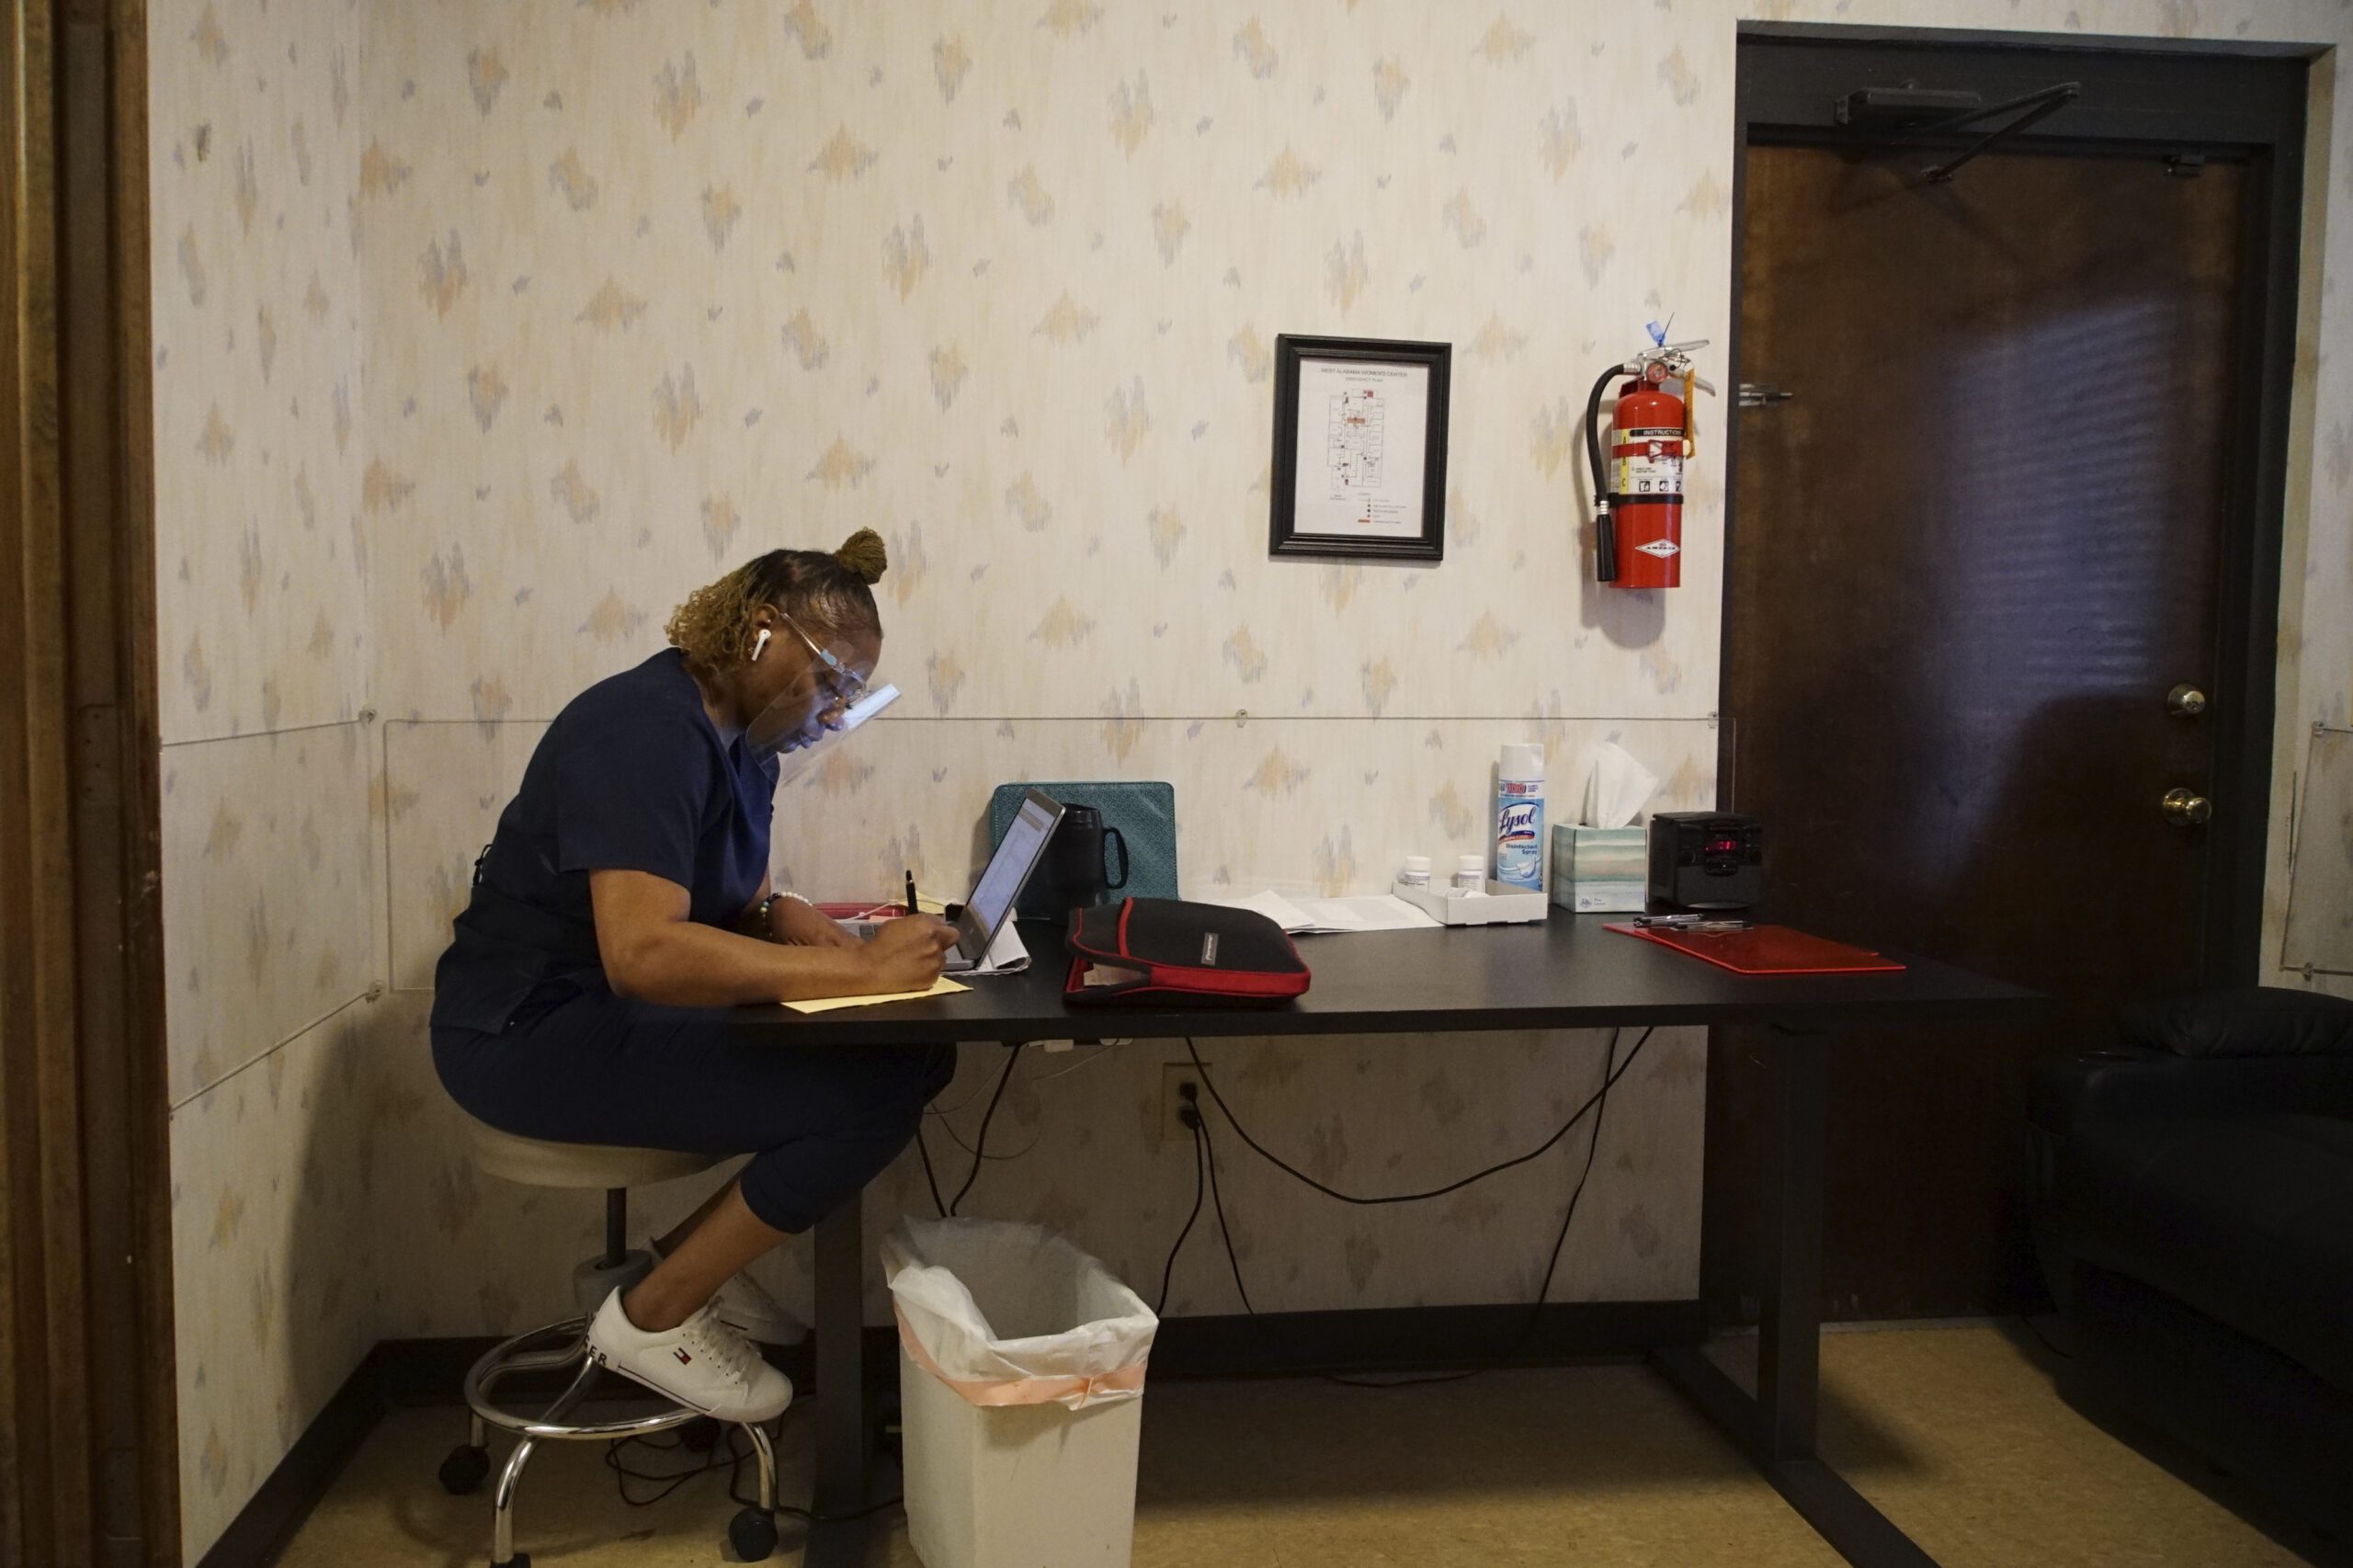 A woman works in the recovery room at the West Alabama Women's Center in Tuscaloosa, Alabama.